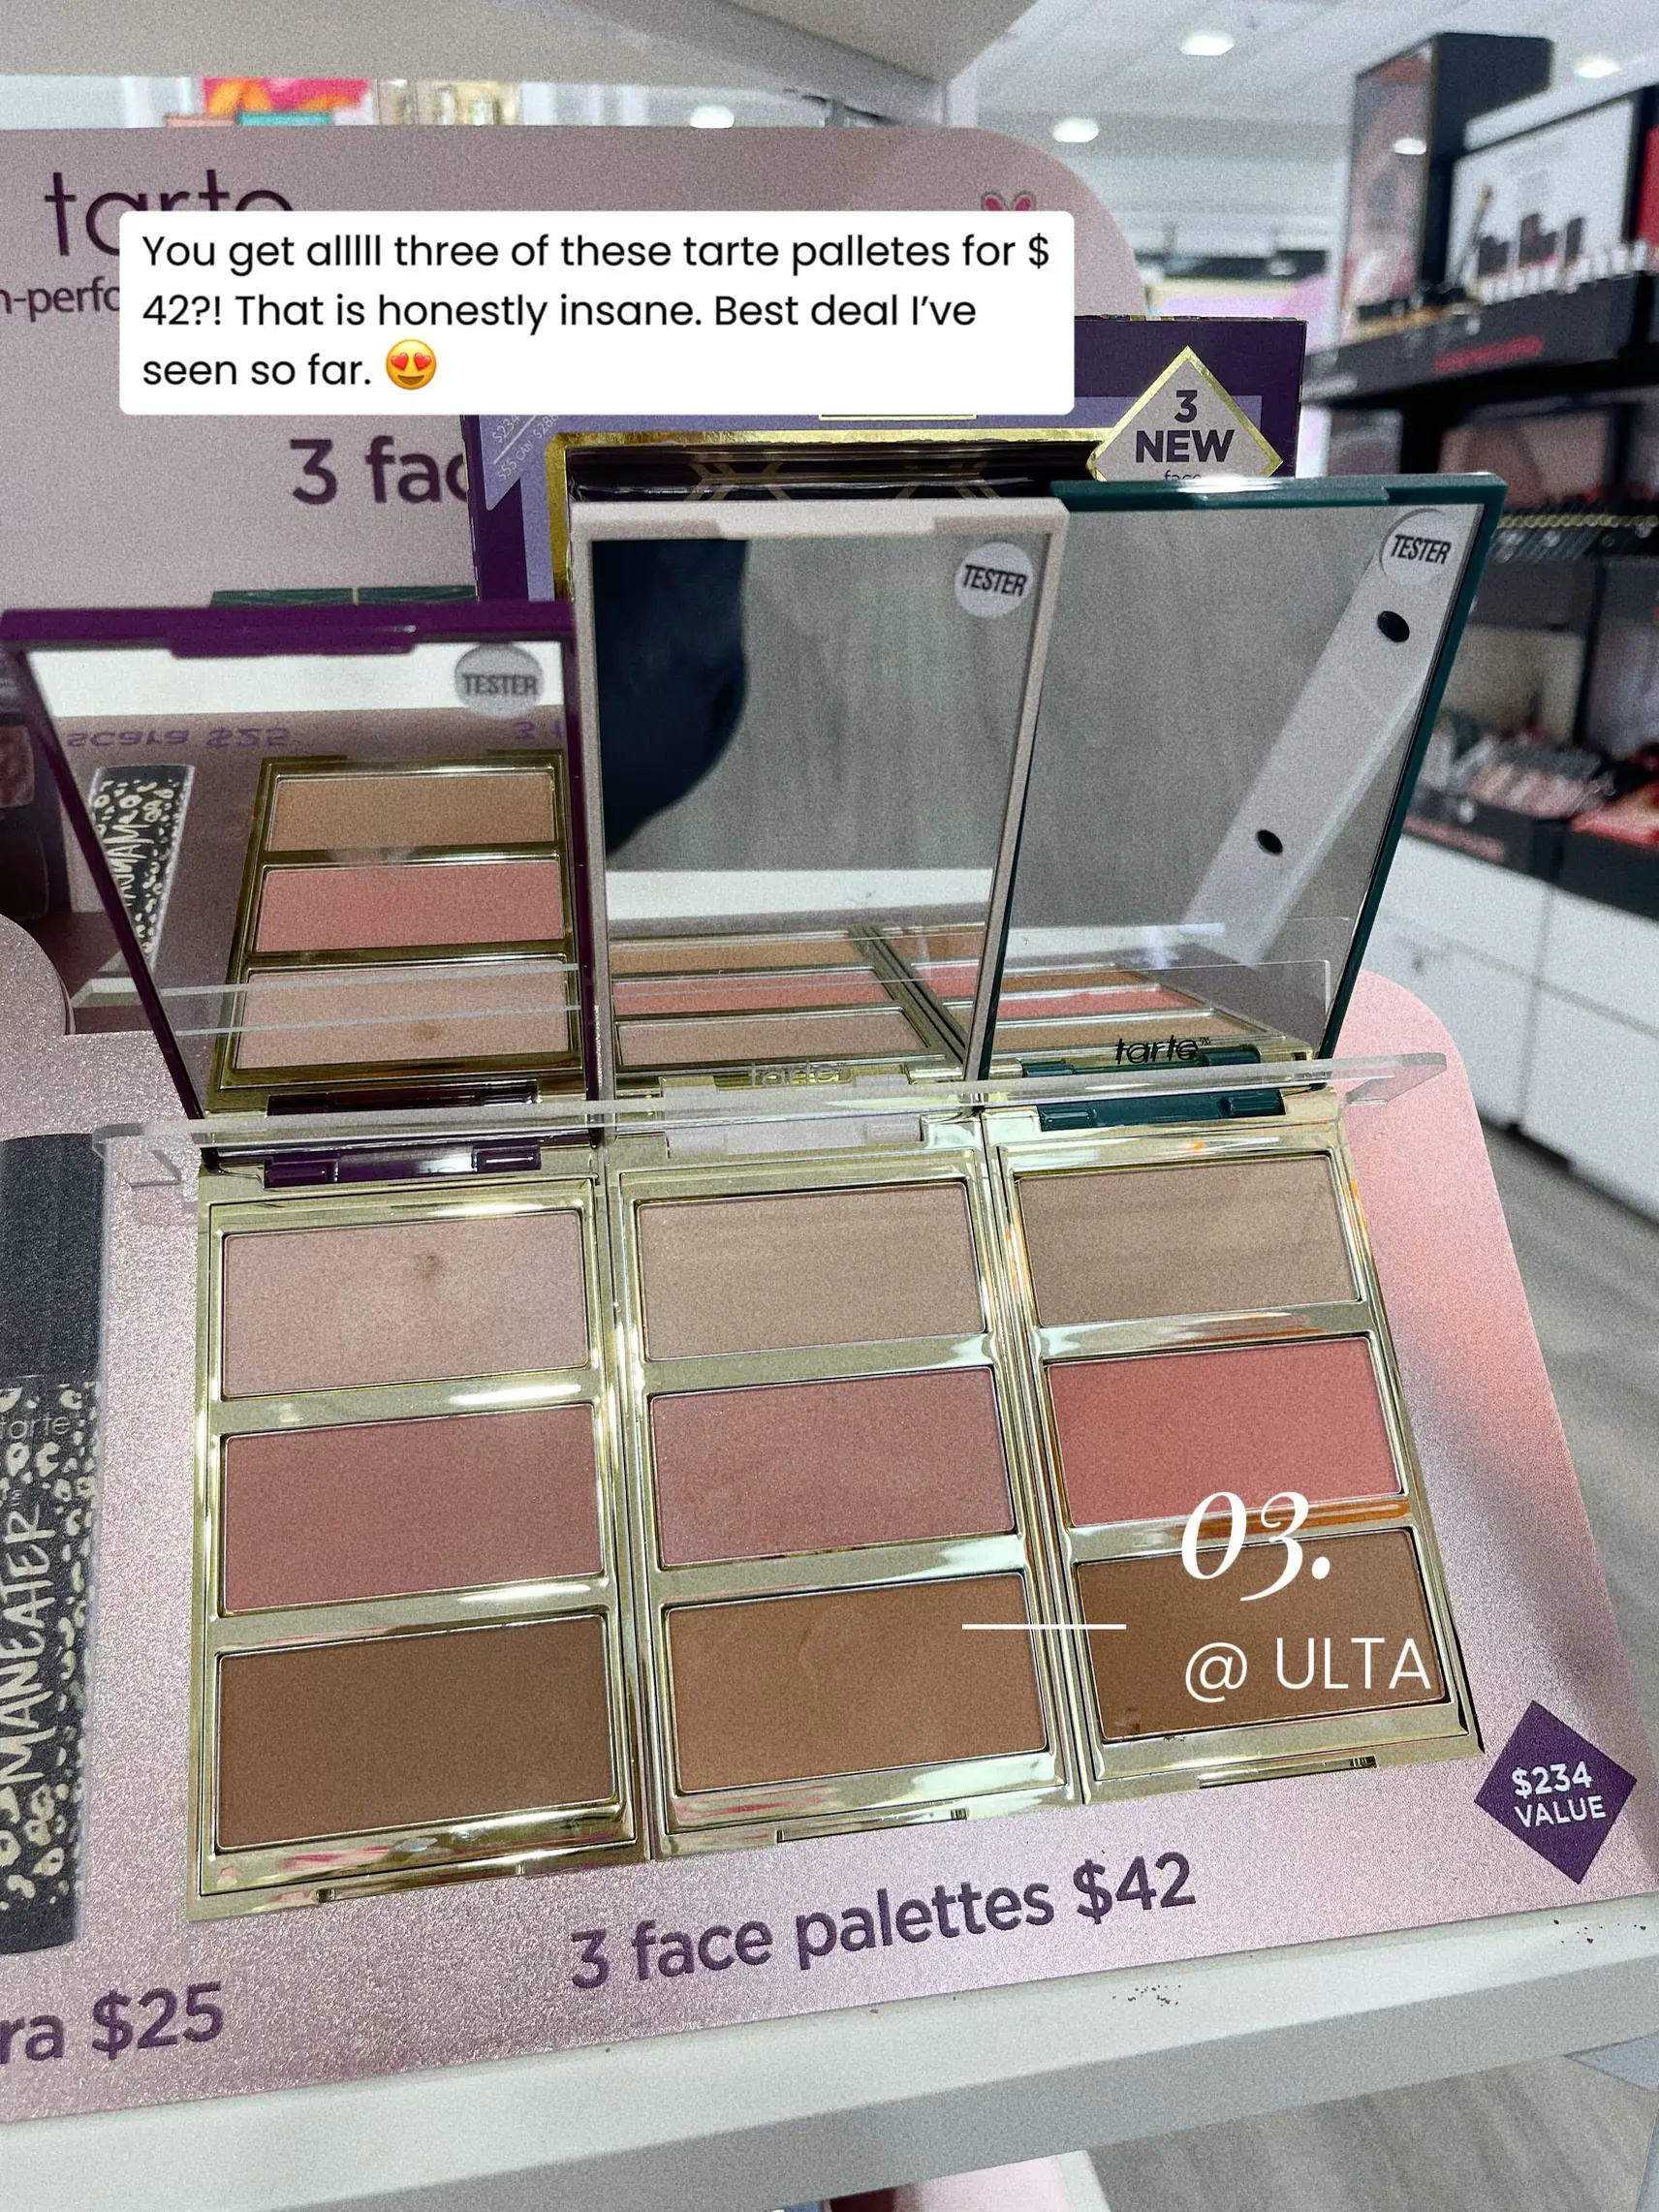  A display of makeup products with a price of $42.